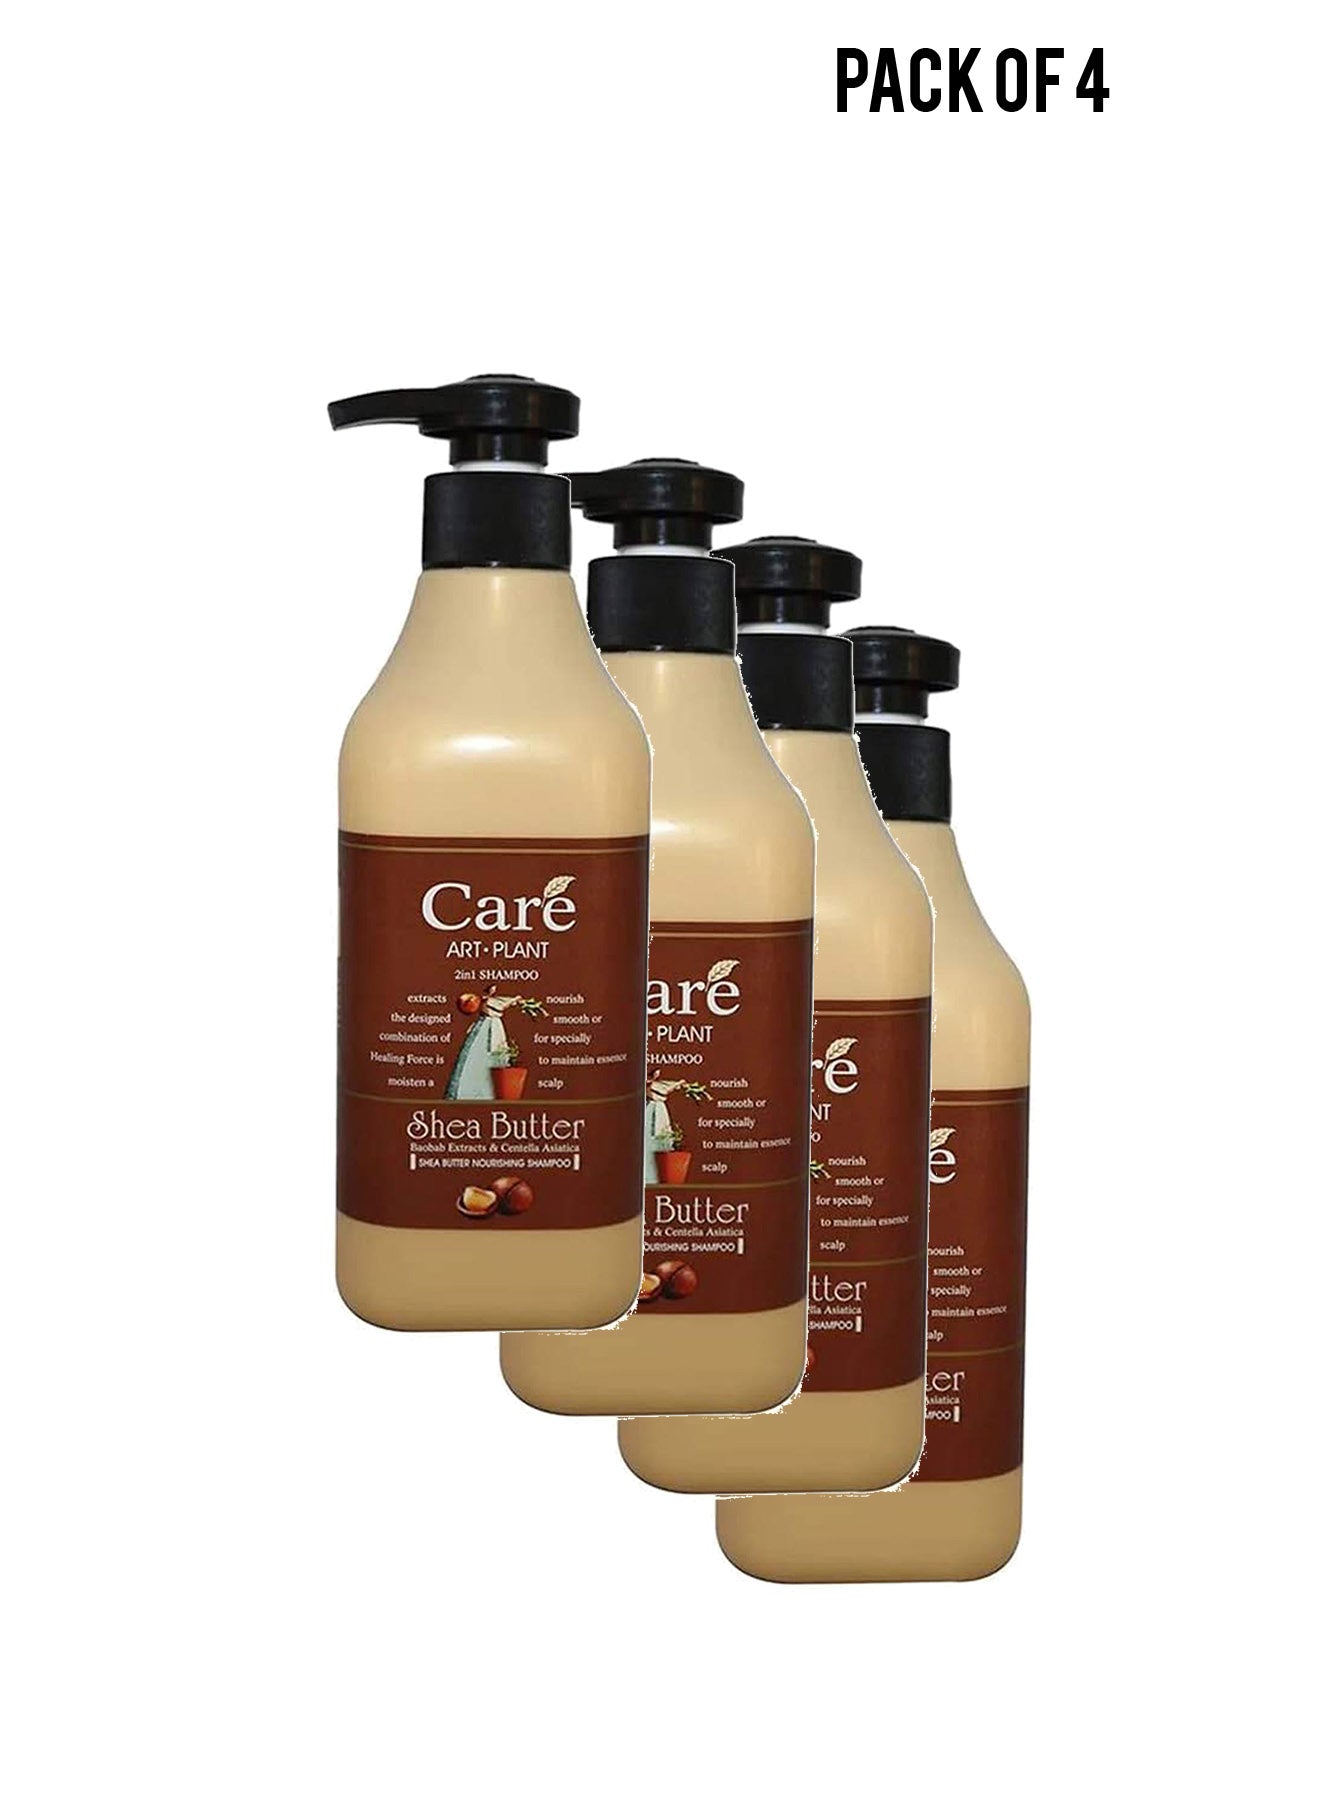 Washami Care Art Plant 2in1 Shea Butter Shampoo 460ml Value Pack of 4 